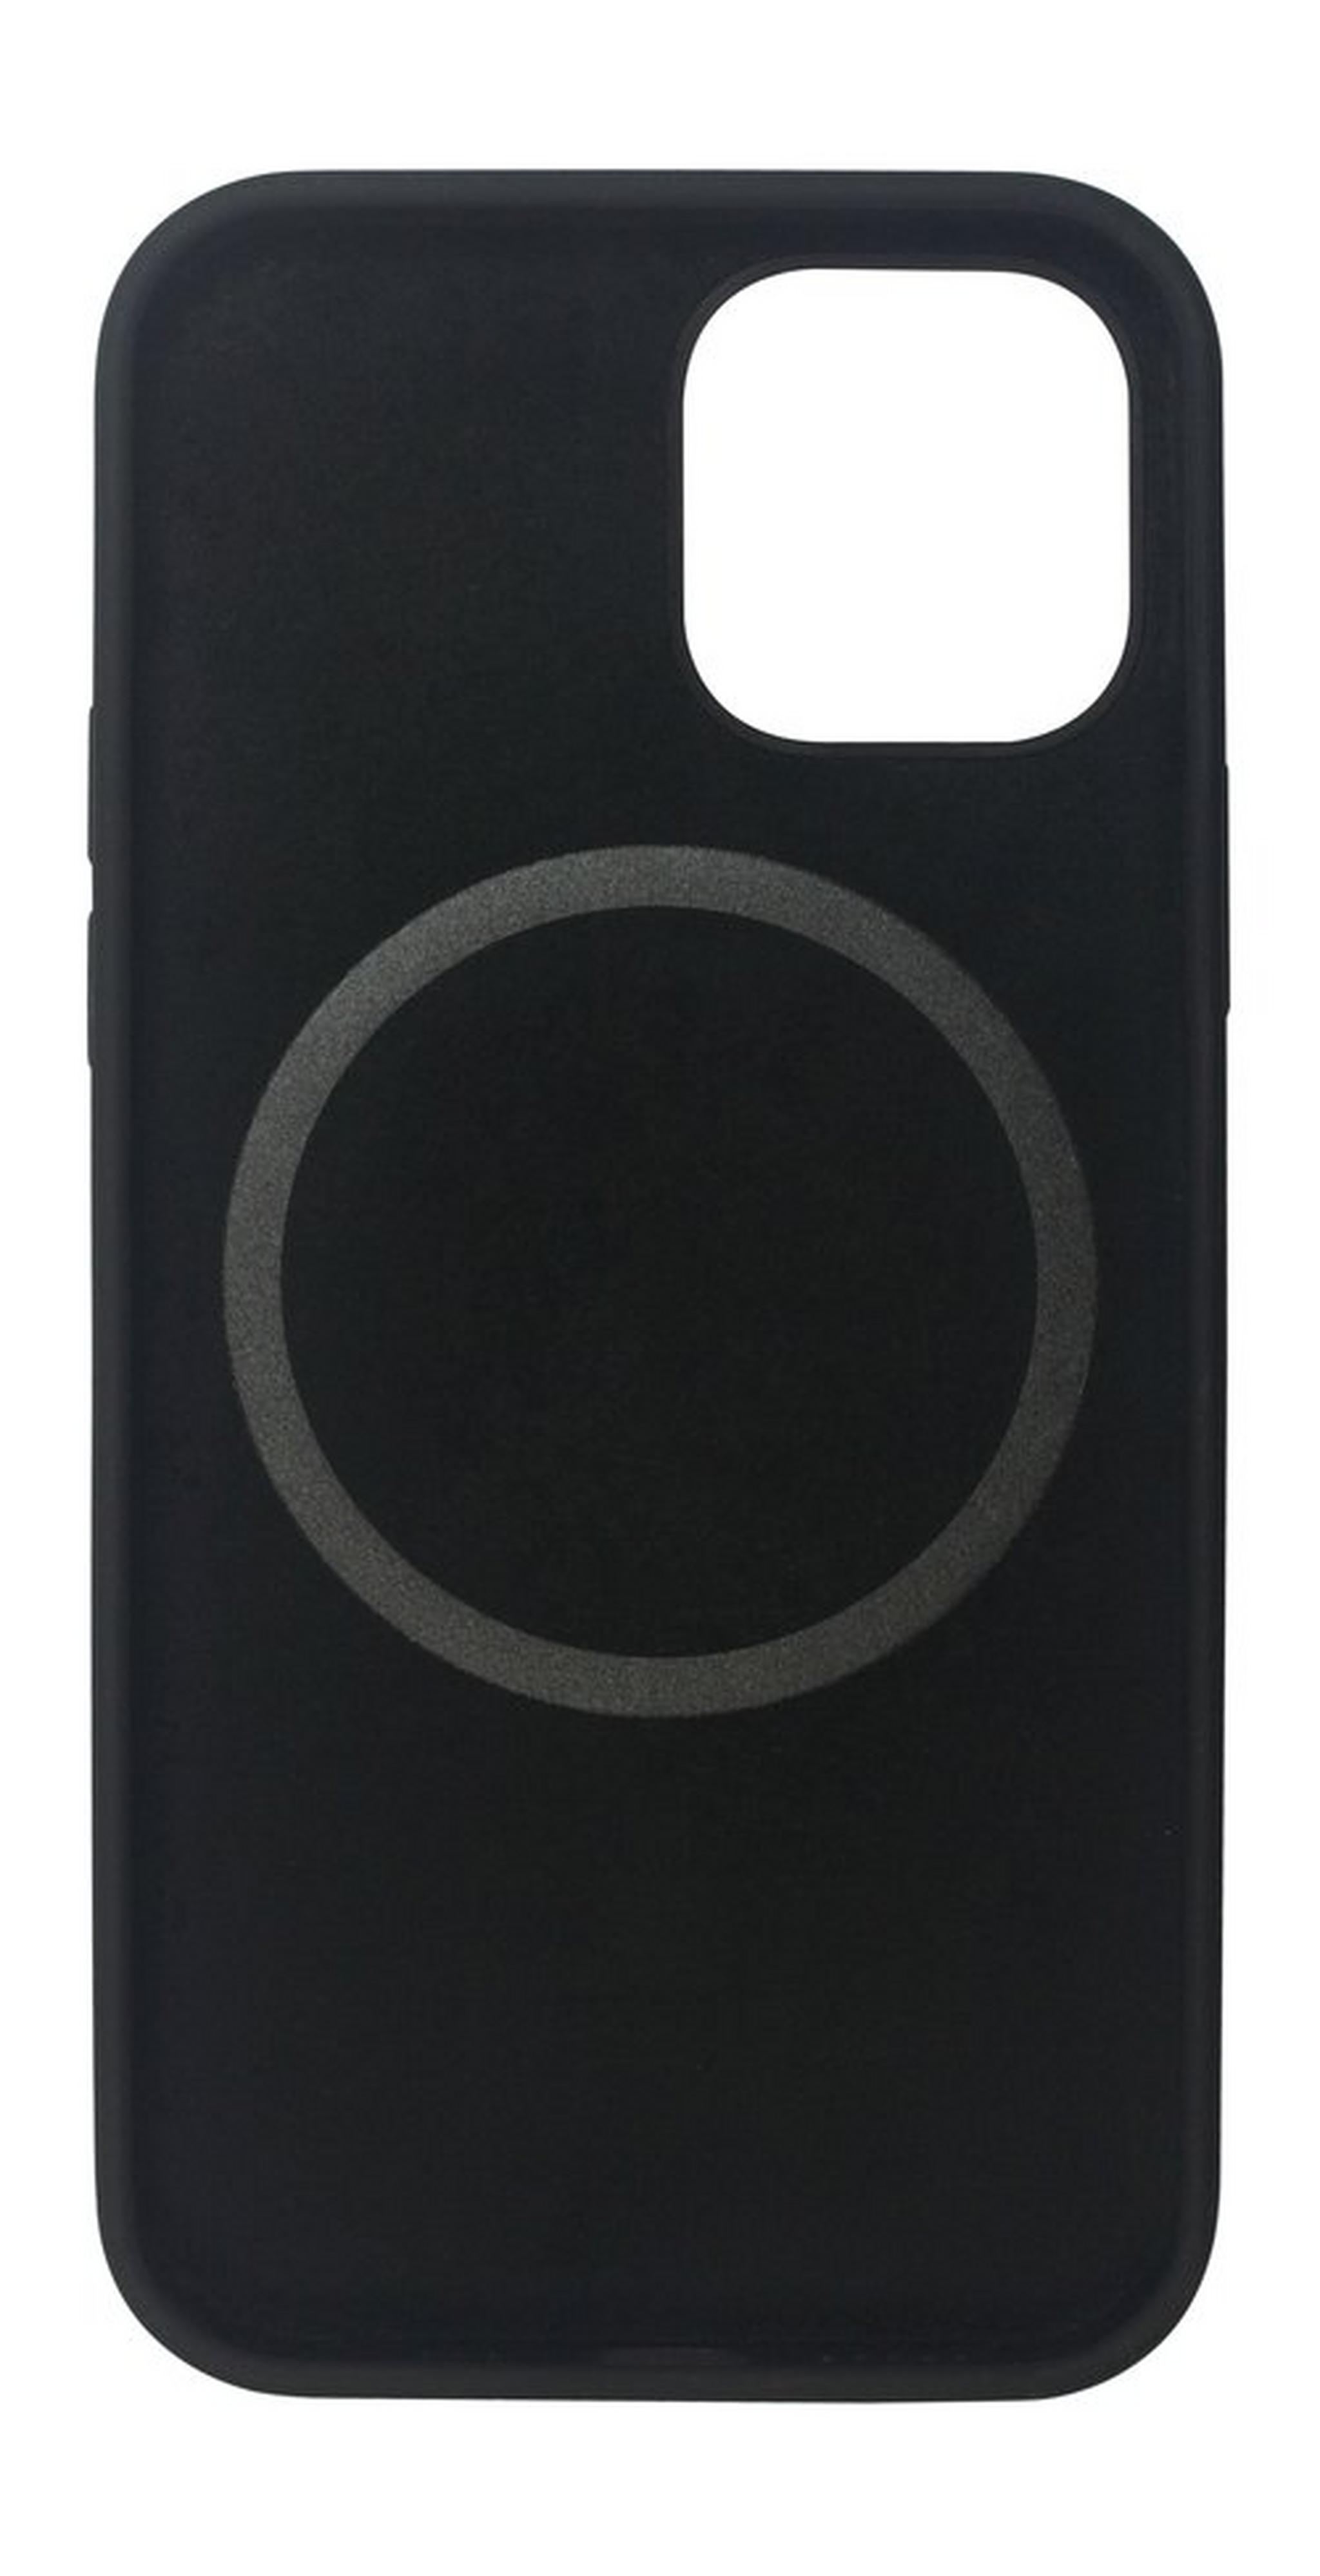 EQ Magsafe Silicone Case for iPhone 12/12 Pro - Black